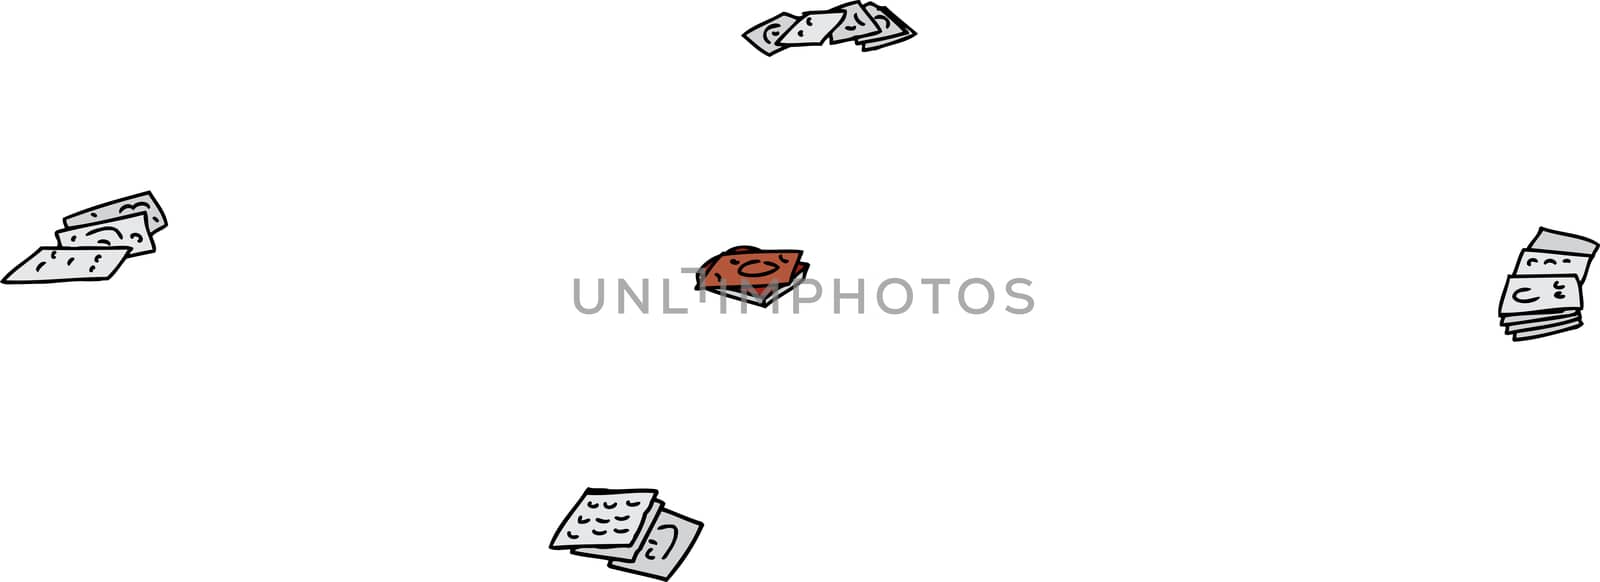 Stacks of cartoon playing cards over white background